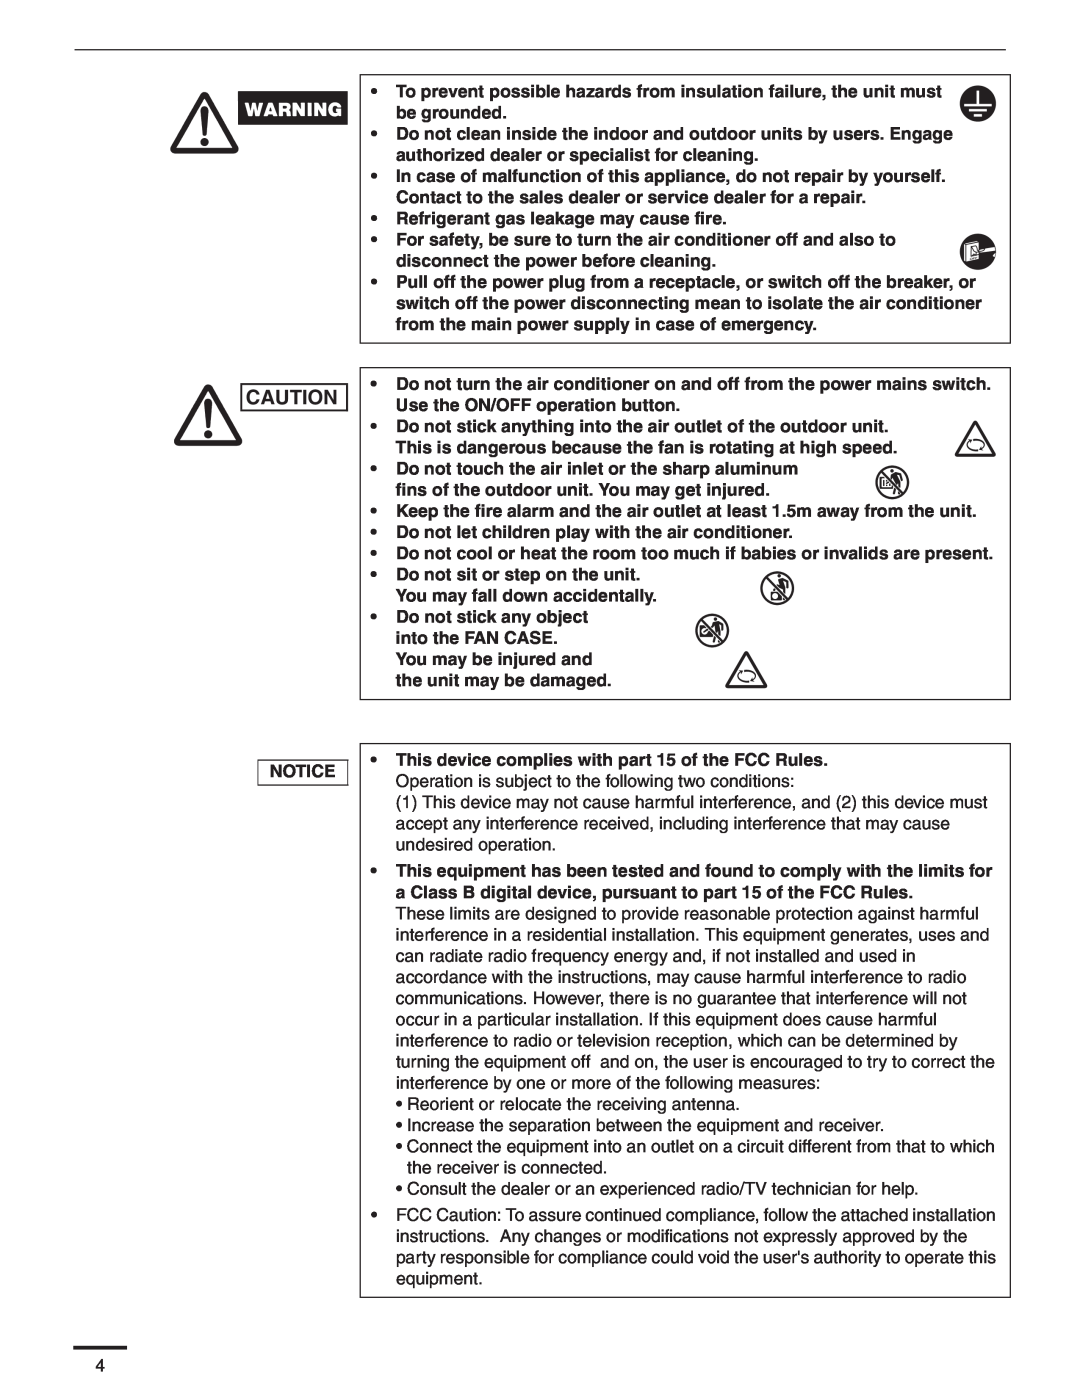 Panasonic CS-MKS18NKU, CS-MKS24NKU, CS-MKS9NKU service manual Refrigerant gas leakage may cause fire 